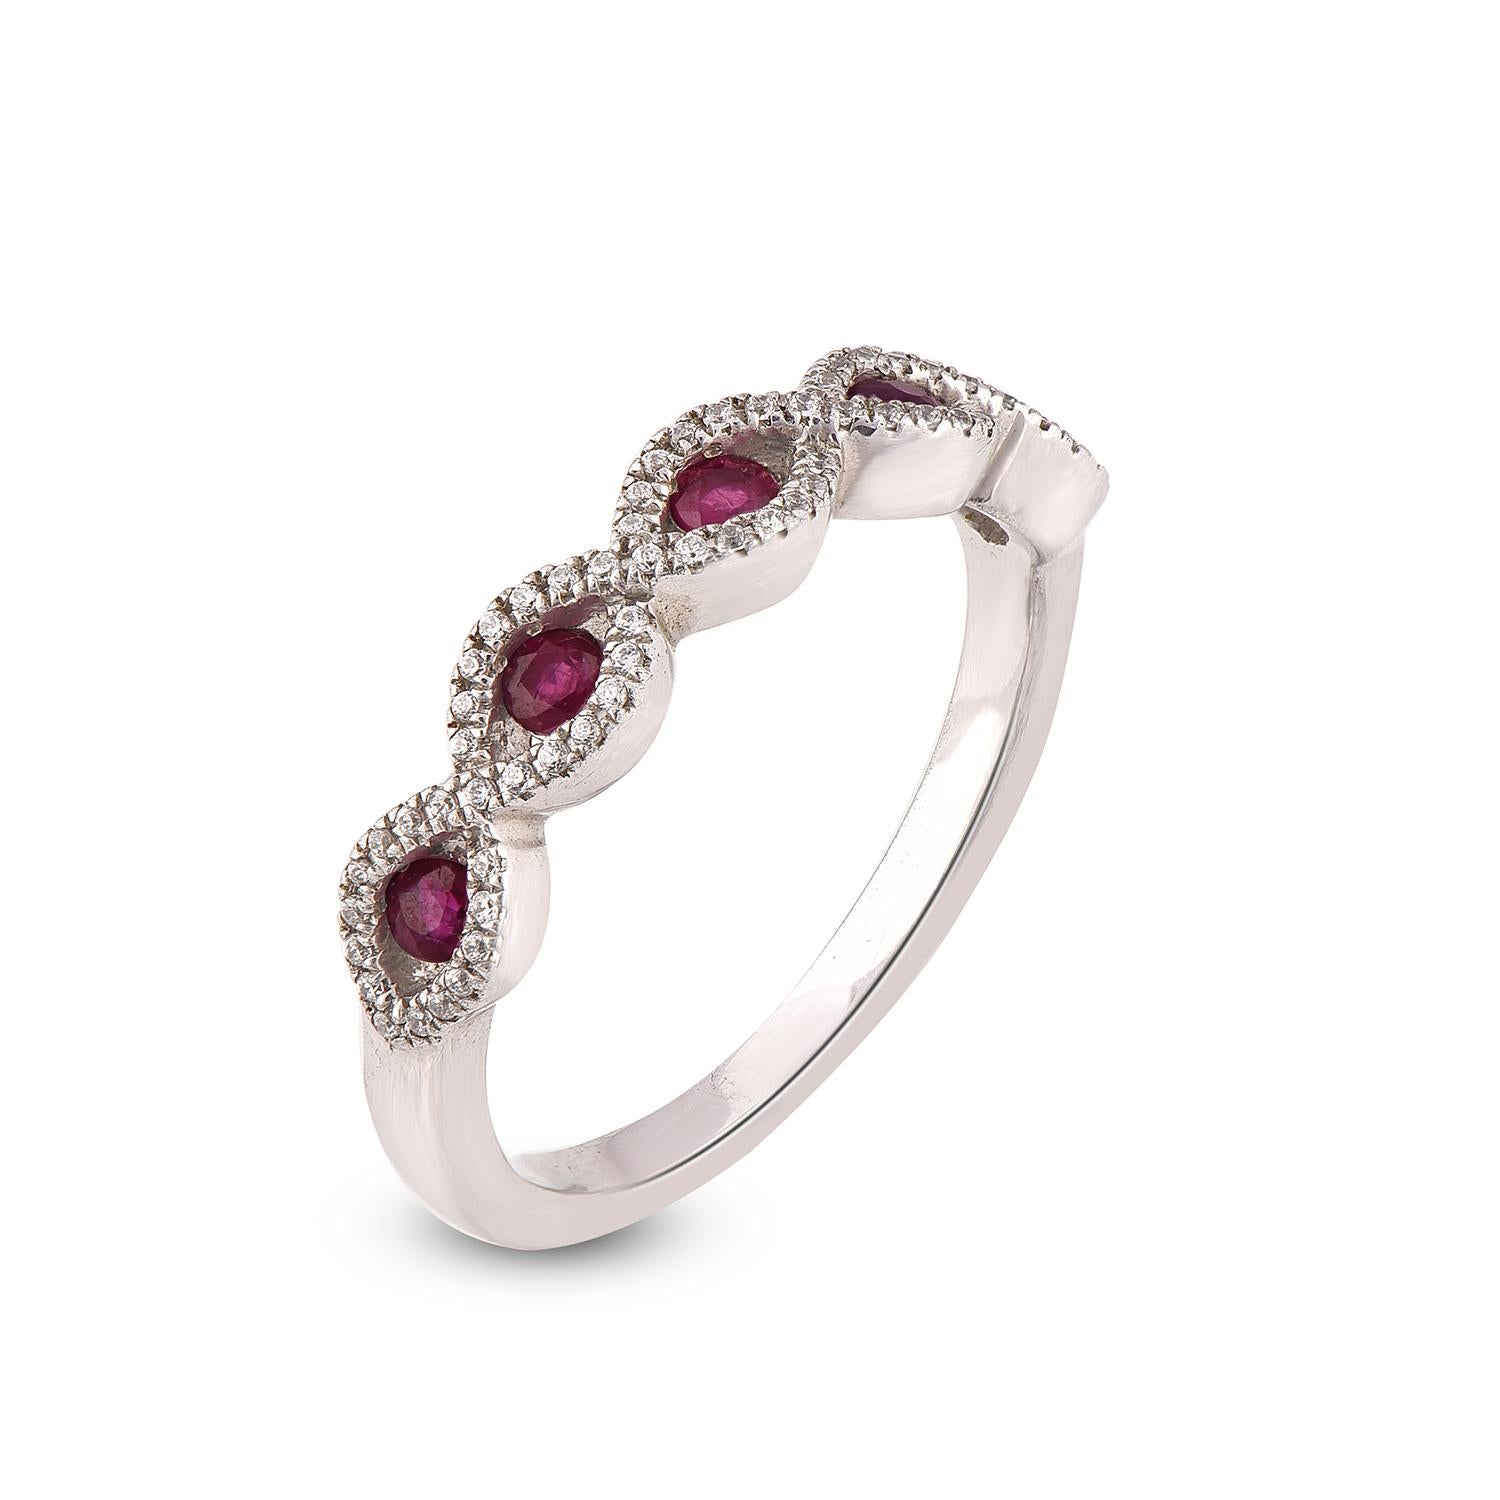 Wear this unique gemstone ring as a wedding band. This Channel set twisted ruby ring band is carefully crafted in 14 Karat white gold. This infinity ring with gemstones showcases approximately 5 round cut rubies and 70 round white diamond. The